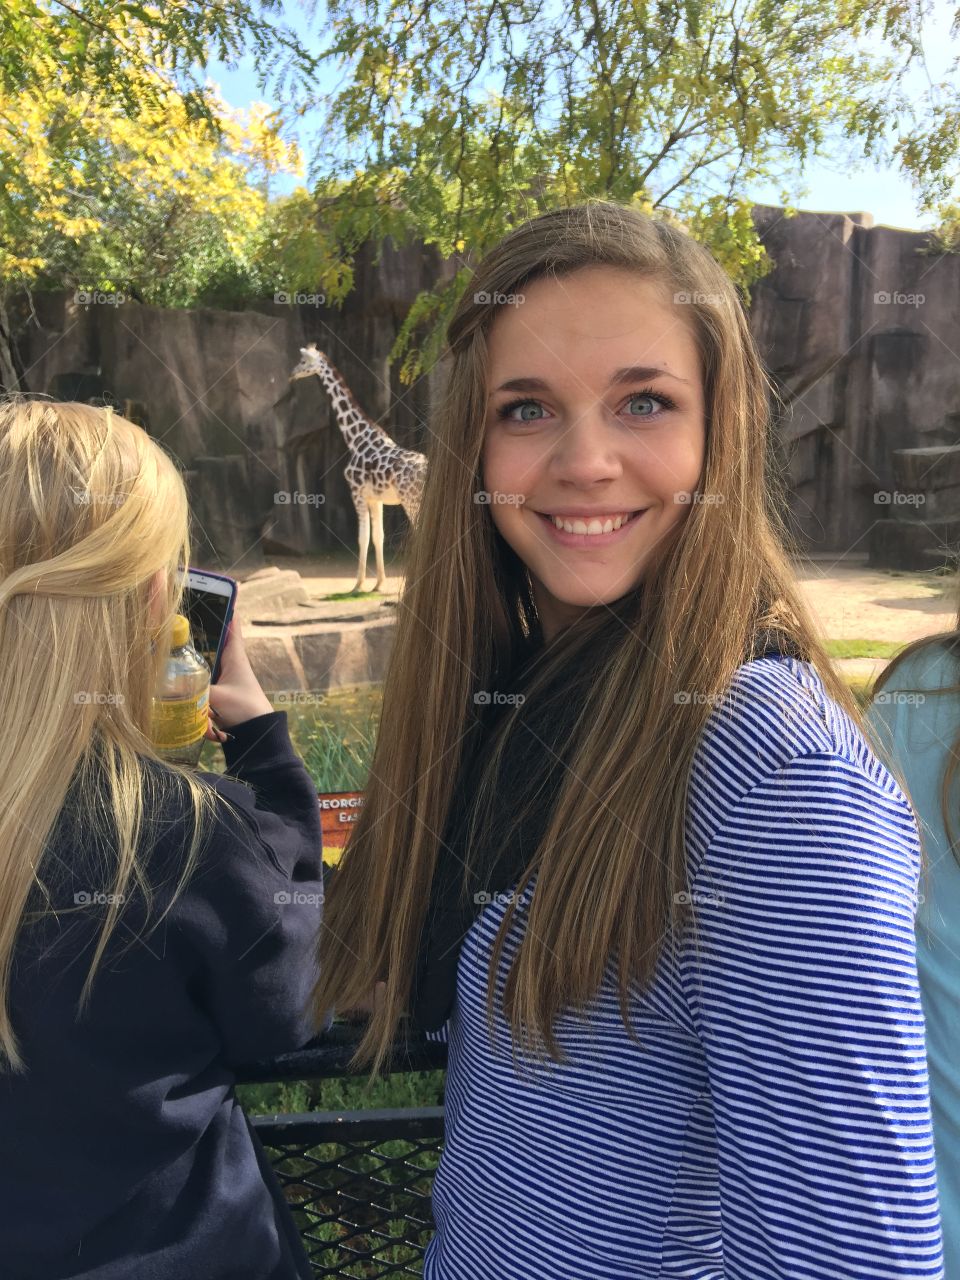 Giraffes at the zoo! 